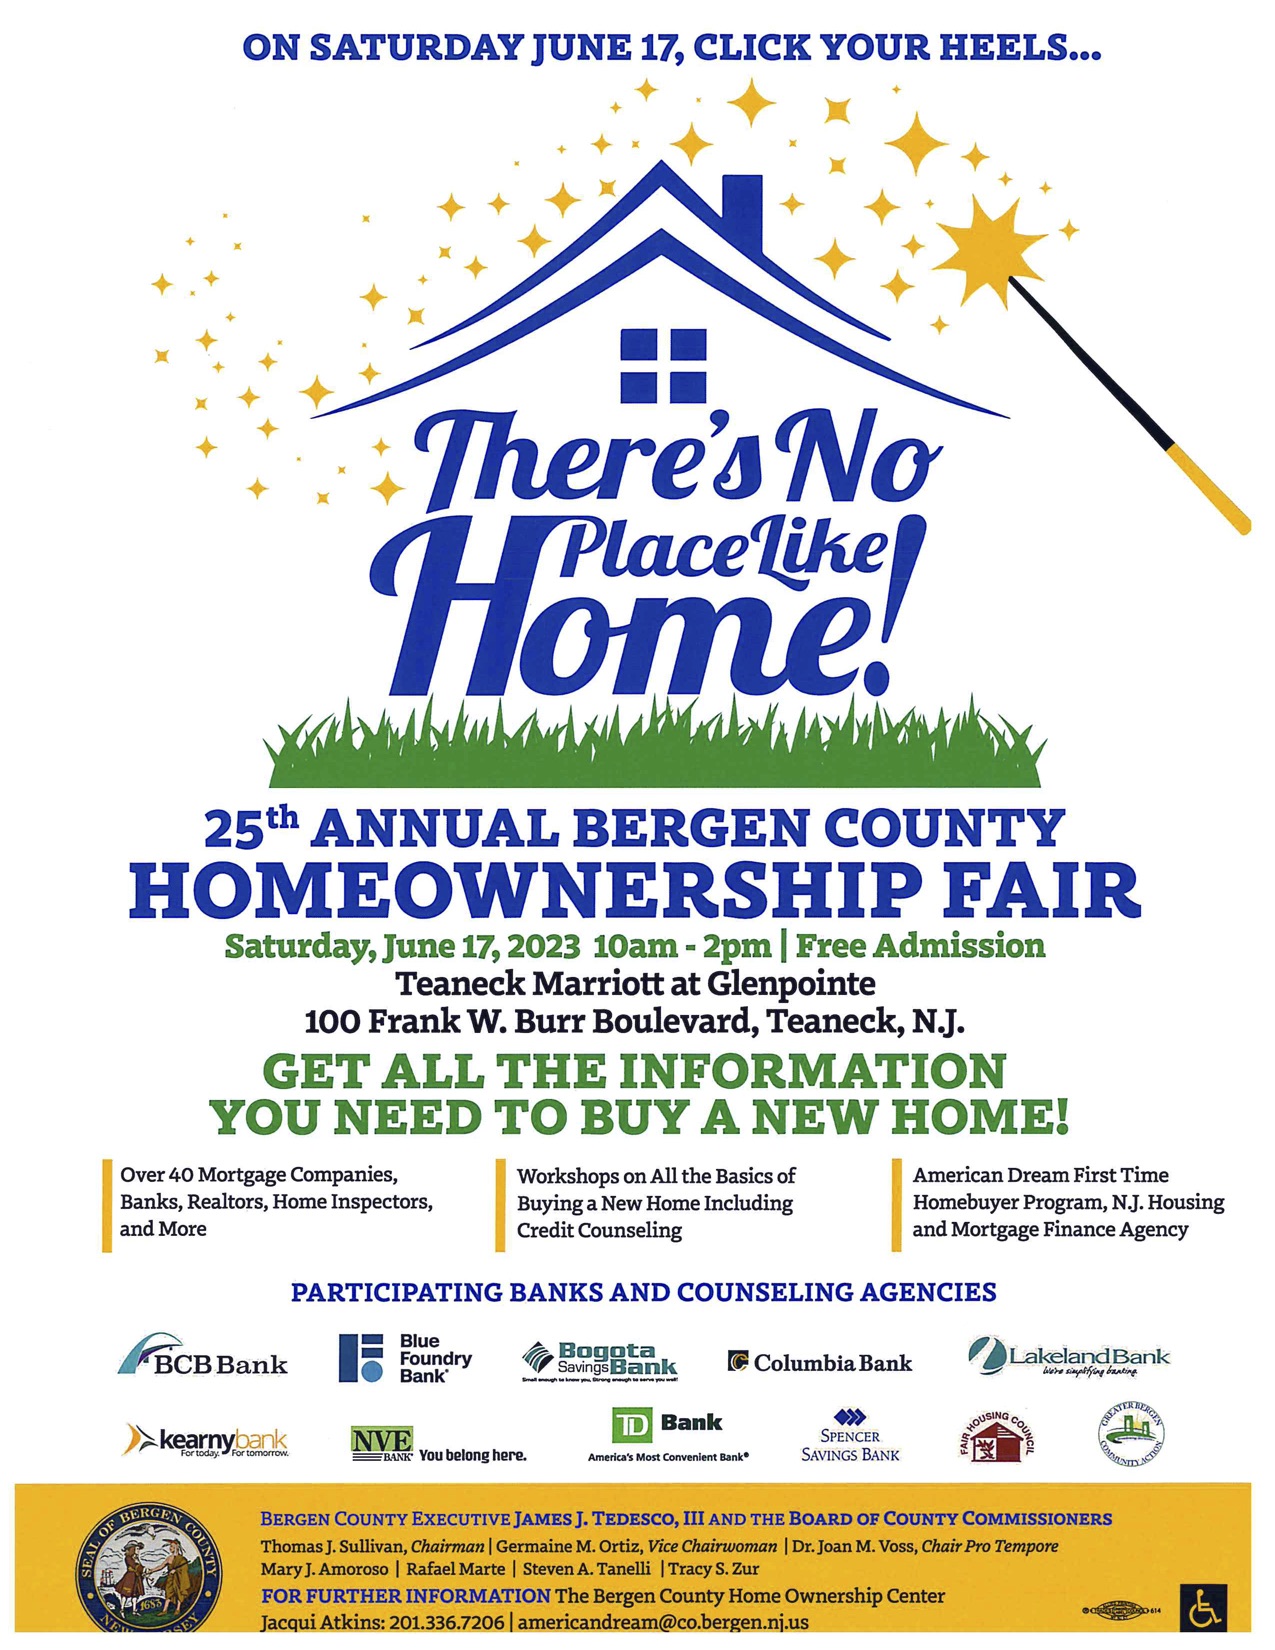 On Saturday June 17, Click your heels...</p>
<p>There's No Place Like Home!</p>
<p>25th Annual Bergen County Homeownership Fair<br />
Saturday, June 17, 2023 10am - 2pm | Free Admission</p>
<p>Teaneck Marriott at Glenpointe<br />
100 Frank W. Burr Boulevard, Teaneck, NJ</p>
<p>Get all the information you need to buy a new home!</p>
<p>Over 40 Mortgage Companies, banks, realtors, home inspectors, and more.</p>
<p>Workshops on all the basics of buying a new home including credit counseling</p>
<p>American dream first time homebuyer program, NJ Housing and Mortgage Finance Agency</p>
<p>Participating Banks and Counseling Agencies:</p>
<p>BCB Bank<br />
Blue Foundry Bank<br />
Bogota Savings Bank<br />
Columbia Bank<br />
Lakeland Bank<br />
Kearny Bank<br />
NVE Bank<br />
TDBank<br />
Spencer Savings Bank<br />
Fair Housing Council<br />
Greater Bergen Community Action